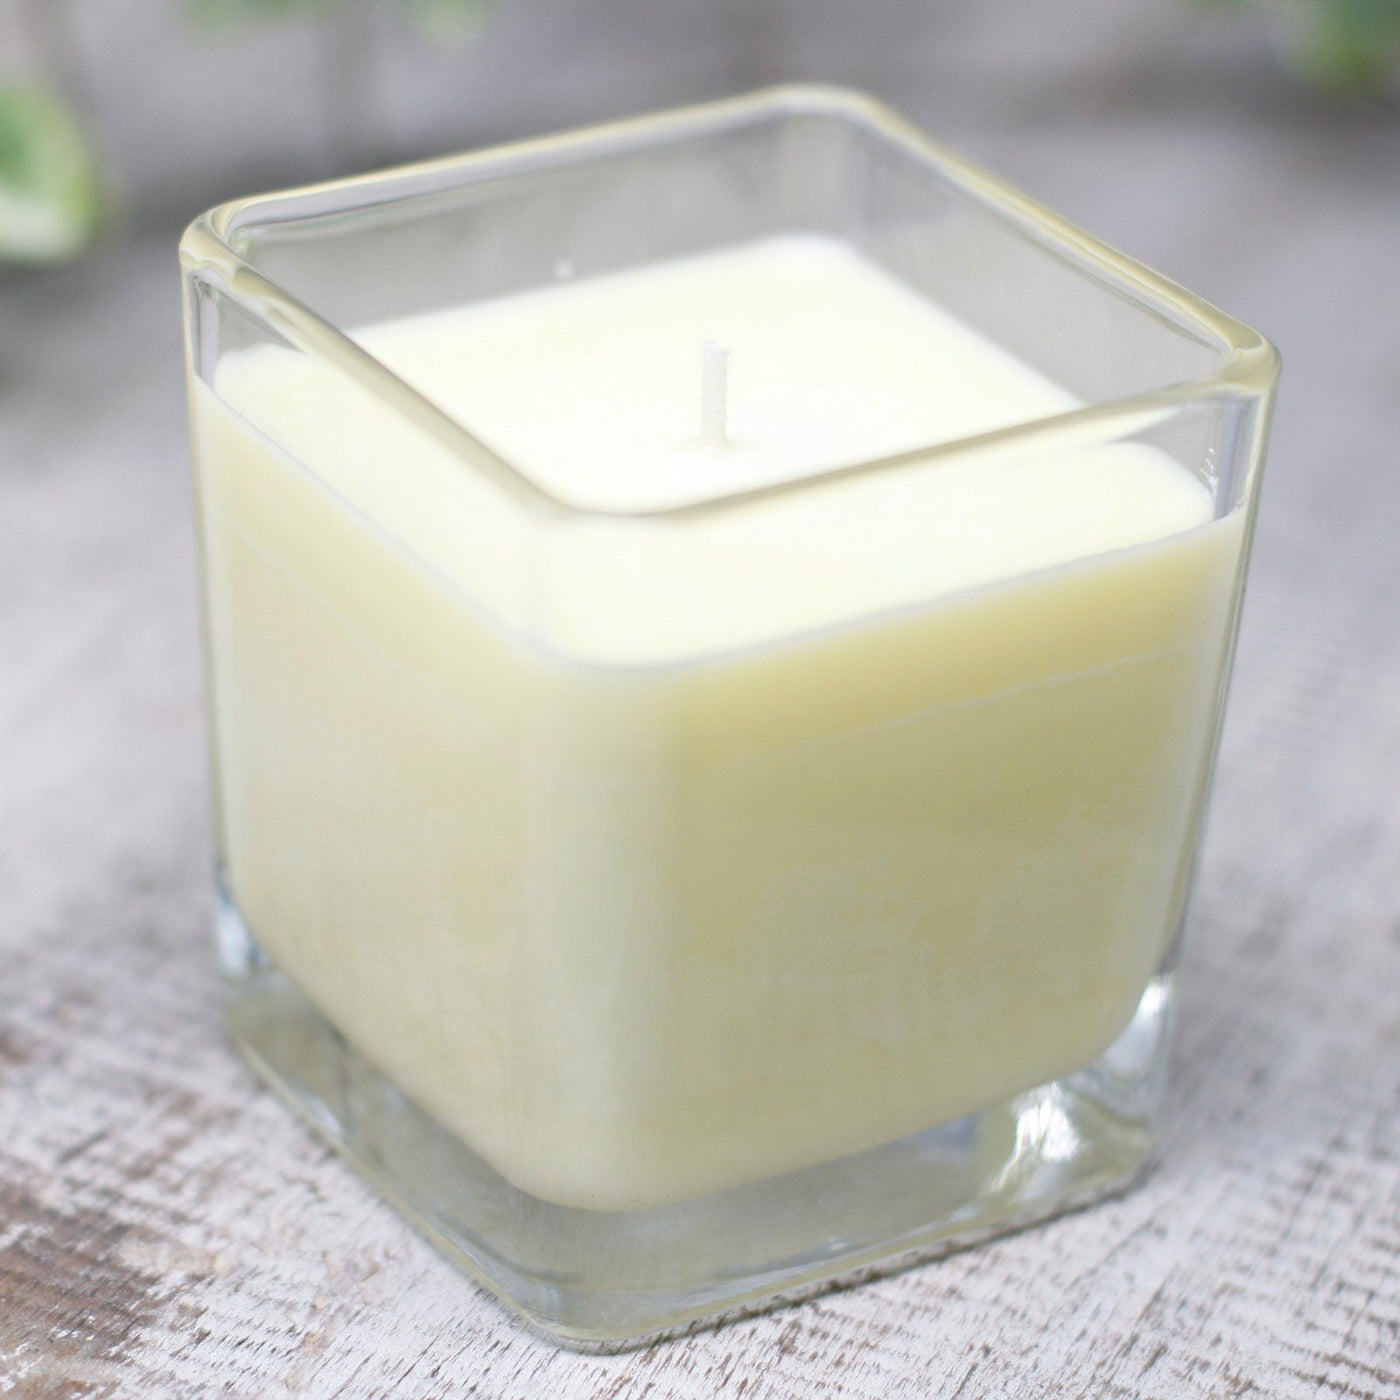 Soy Wax Scented Glass Jar Candle - Home Bakery  These beautiful candles are made with pure soy wax and high-quality fragrance oils. Soy wax candles are a great eco-friendly alternative to paraffin candles. Soy candles burn evenly, so you won’t have any wax left on the sides of the jar. They disperse the fragrance beautifully and are better for the planet. Soy candles also burn 30-50% longer and do not contain the toxins that paraffin candles have. What’s not to love?